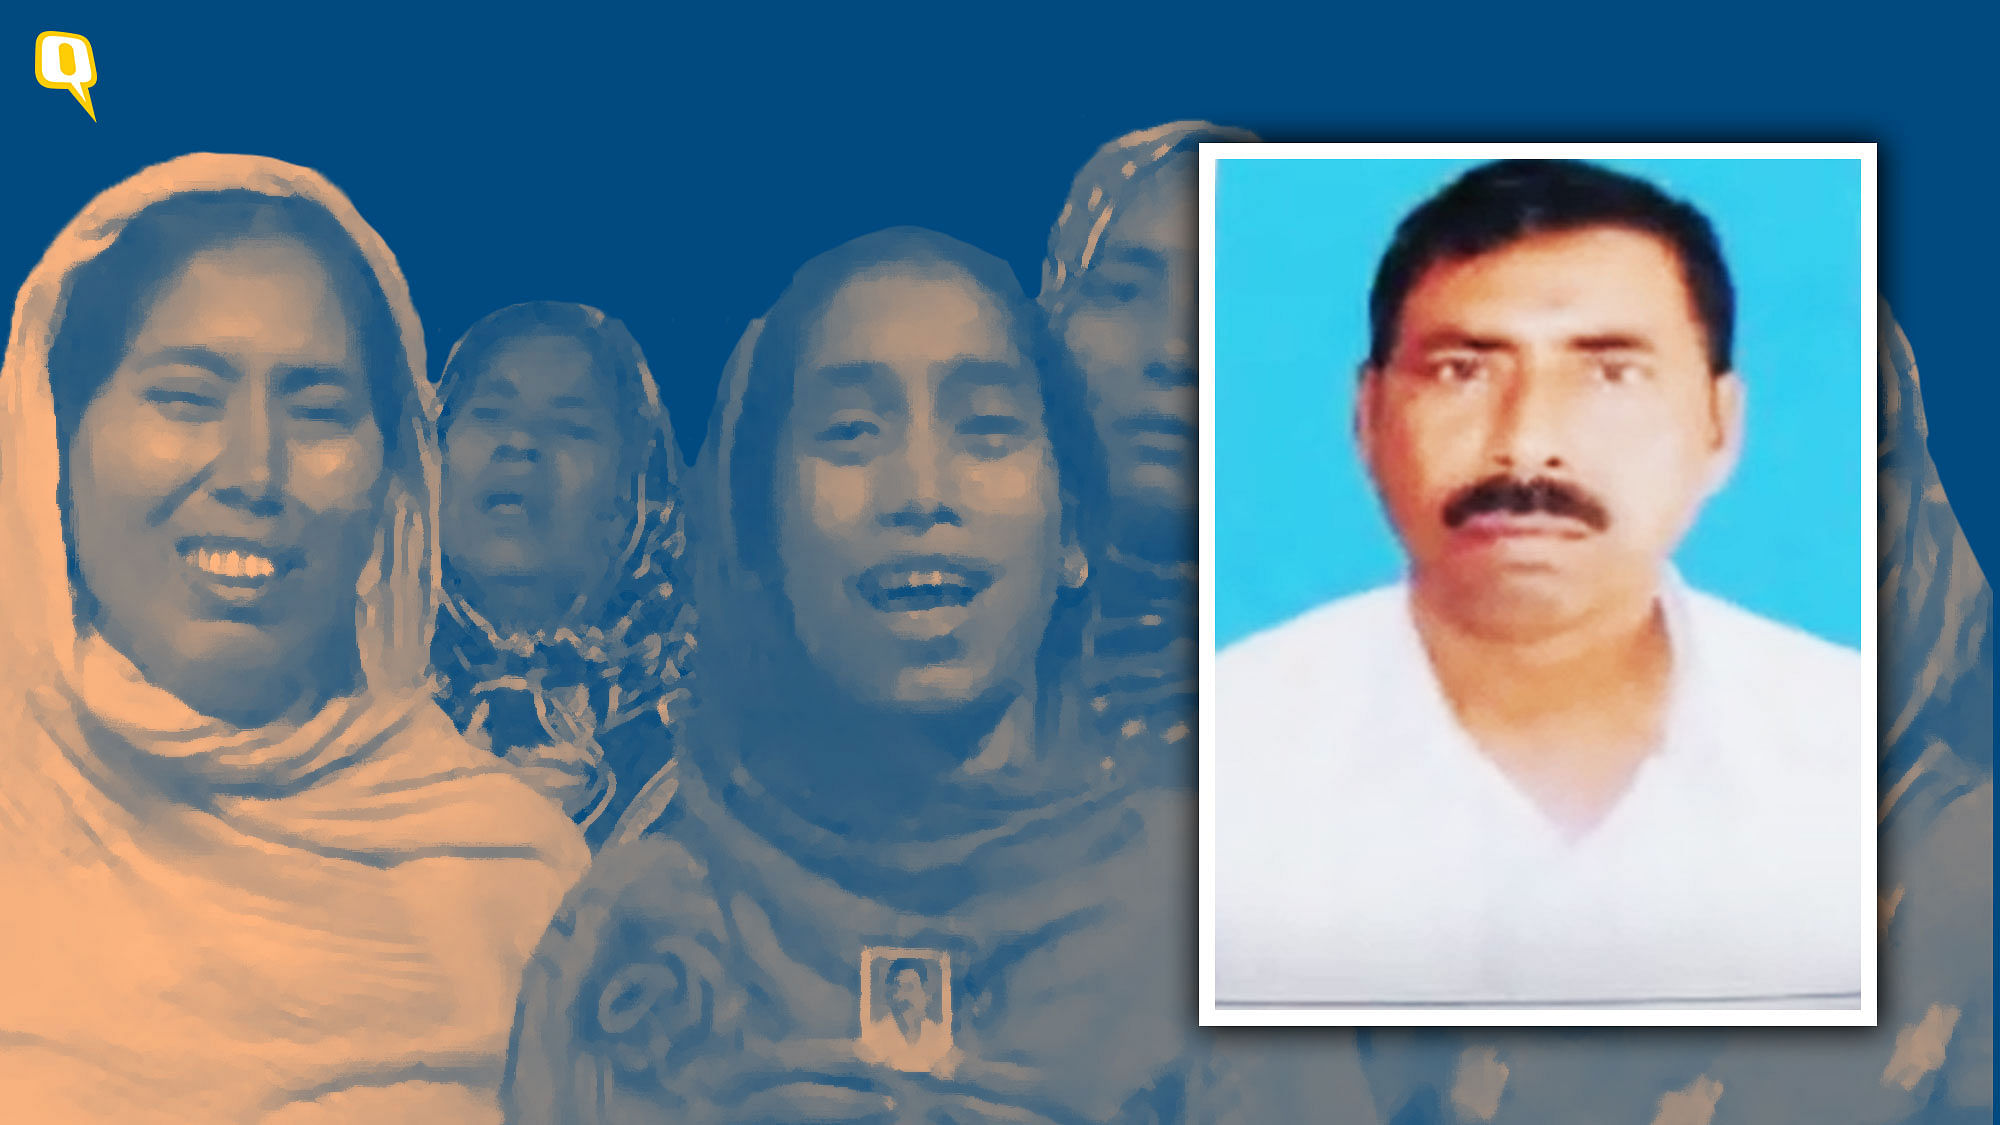 55-year-old labourer Mohammed Afrazul, who hails from Bengal’s Kaliachak, was beaten and then burnt to death in Rajasthan’s Rajsamand district on 6 December.